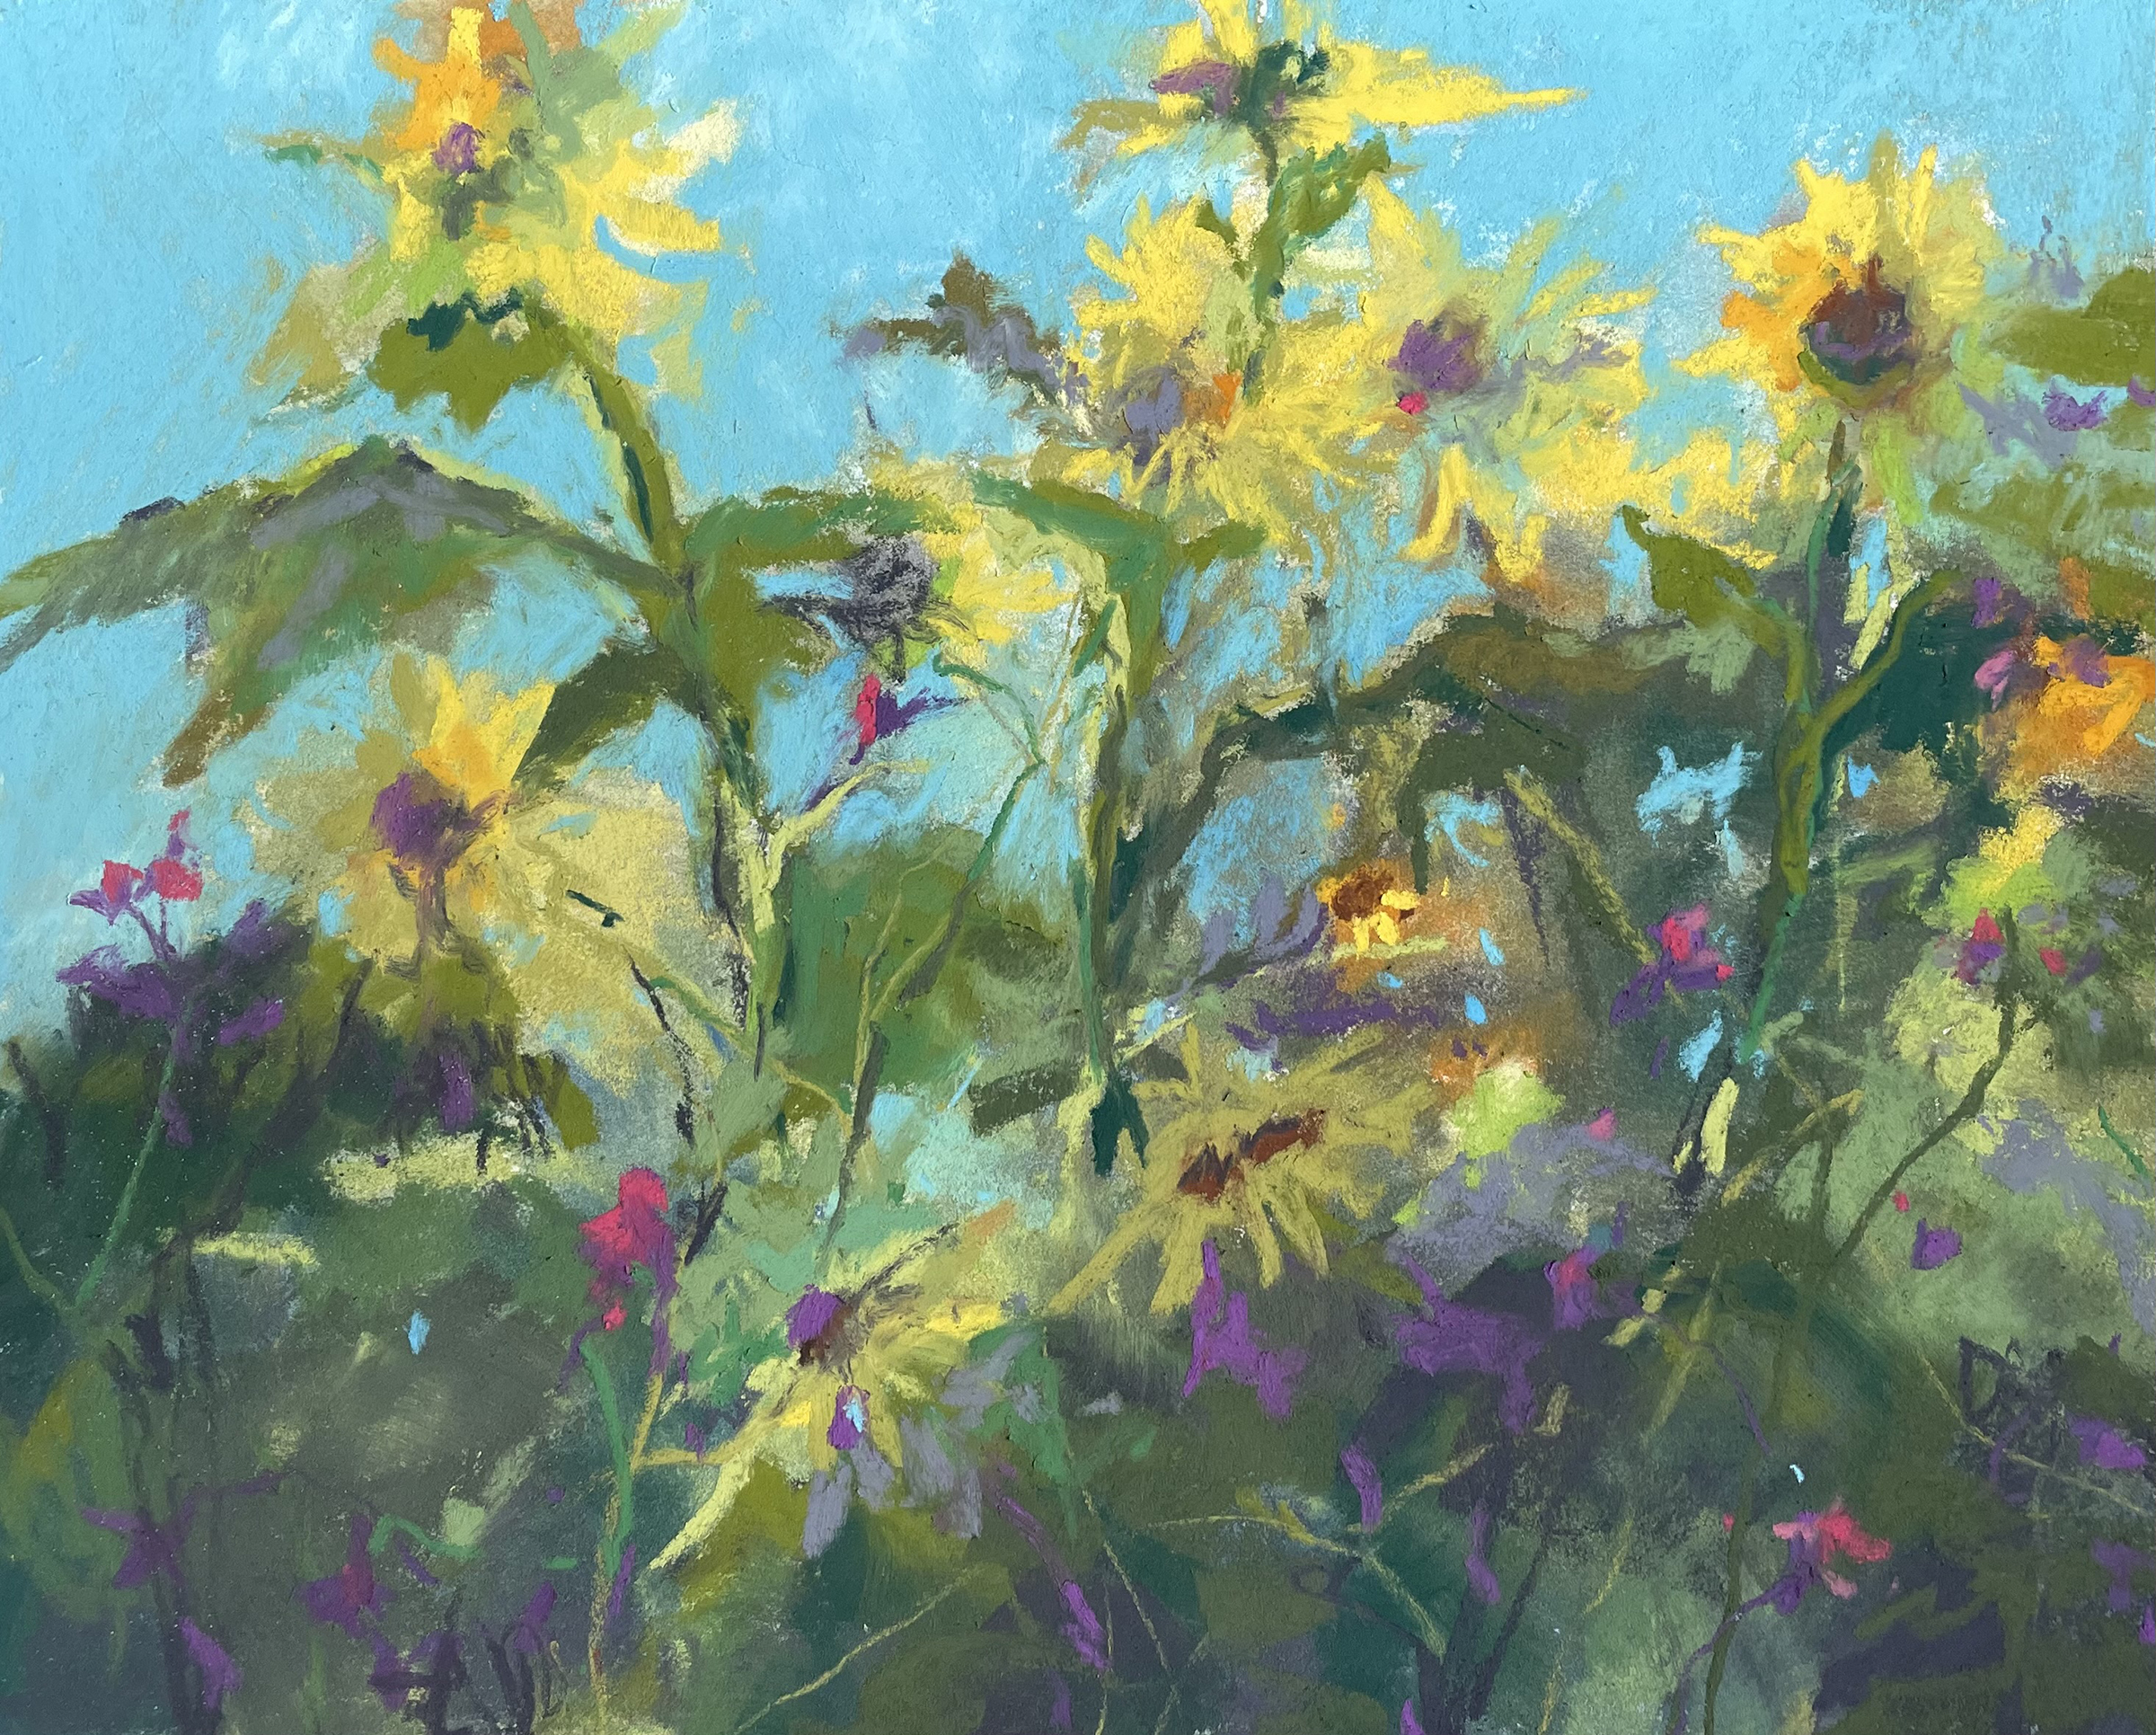 5. Julie Skoda, “Morning Sunflowers,” 2023, pastel, 8 x 10 in., Available from artist, Plein air